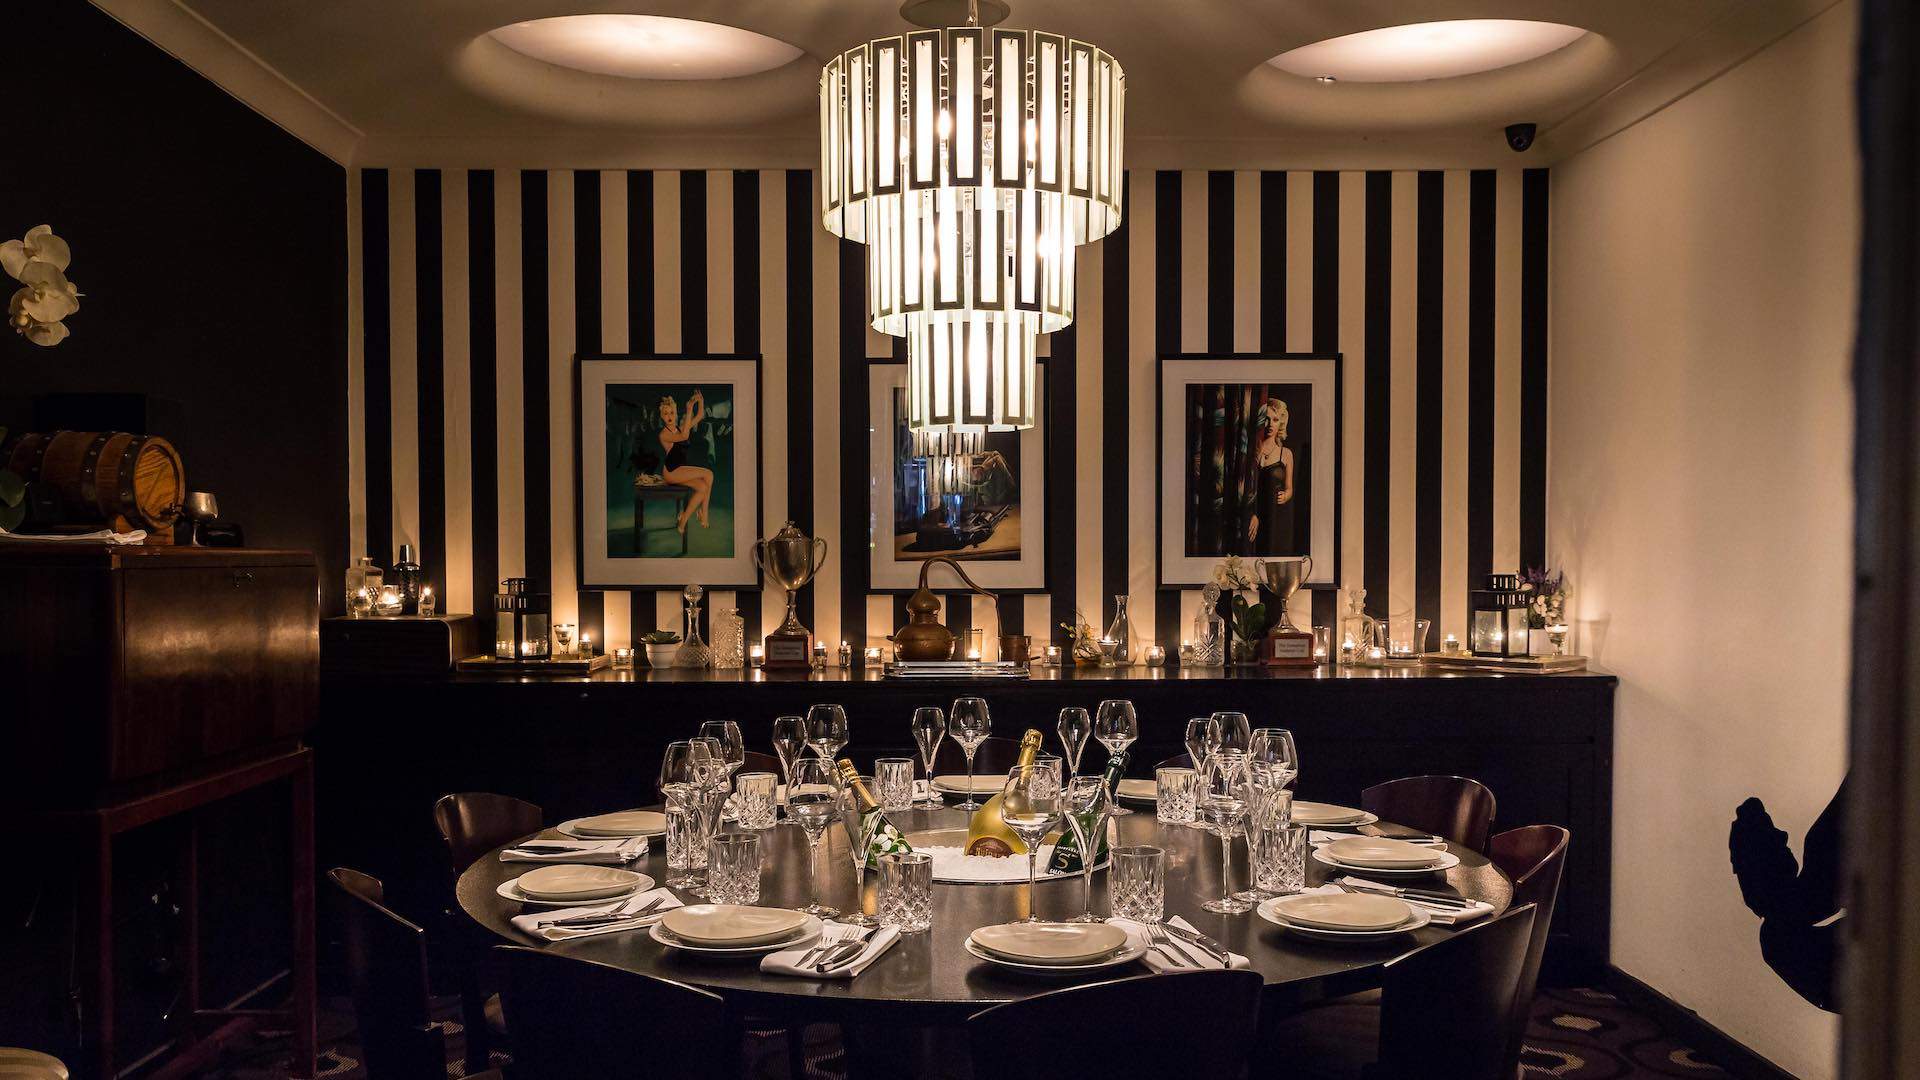 the private dining room at the Roosevelt sydney - one of the best private dining rooms in sydney